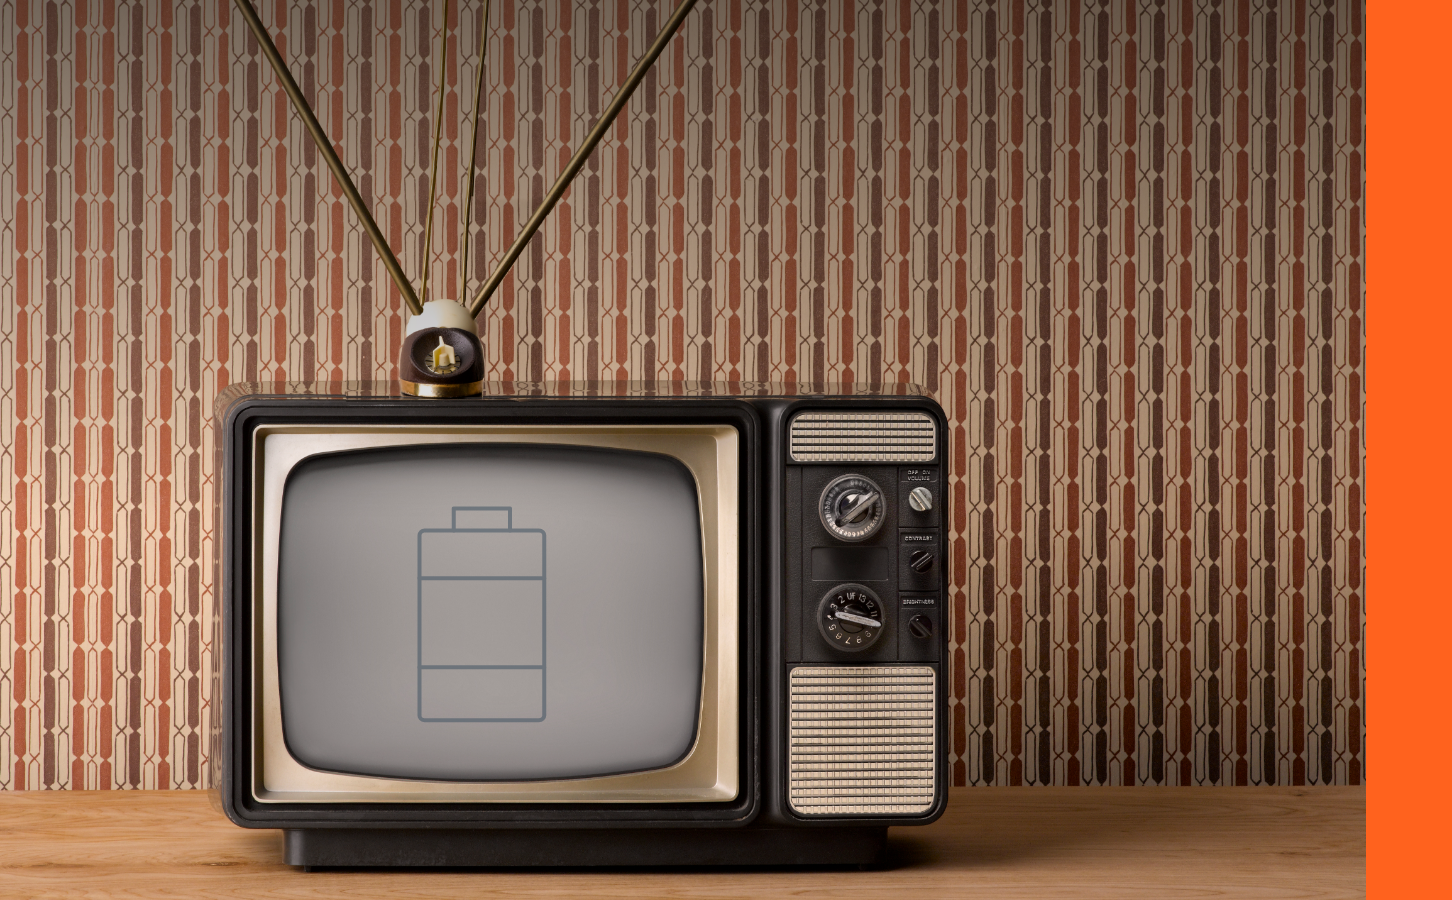 An old-school TV with an antenna